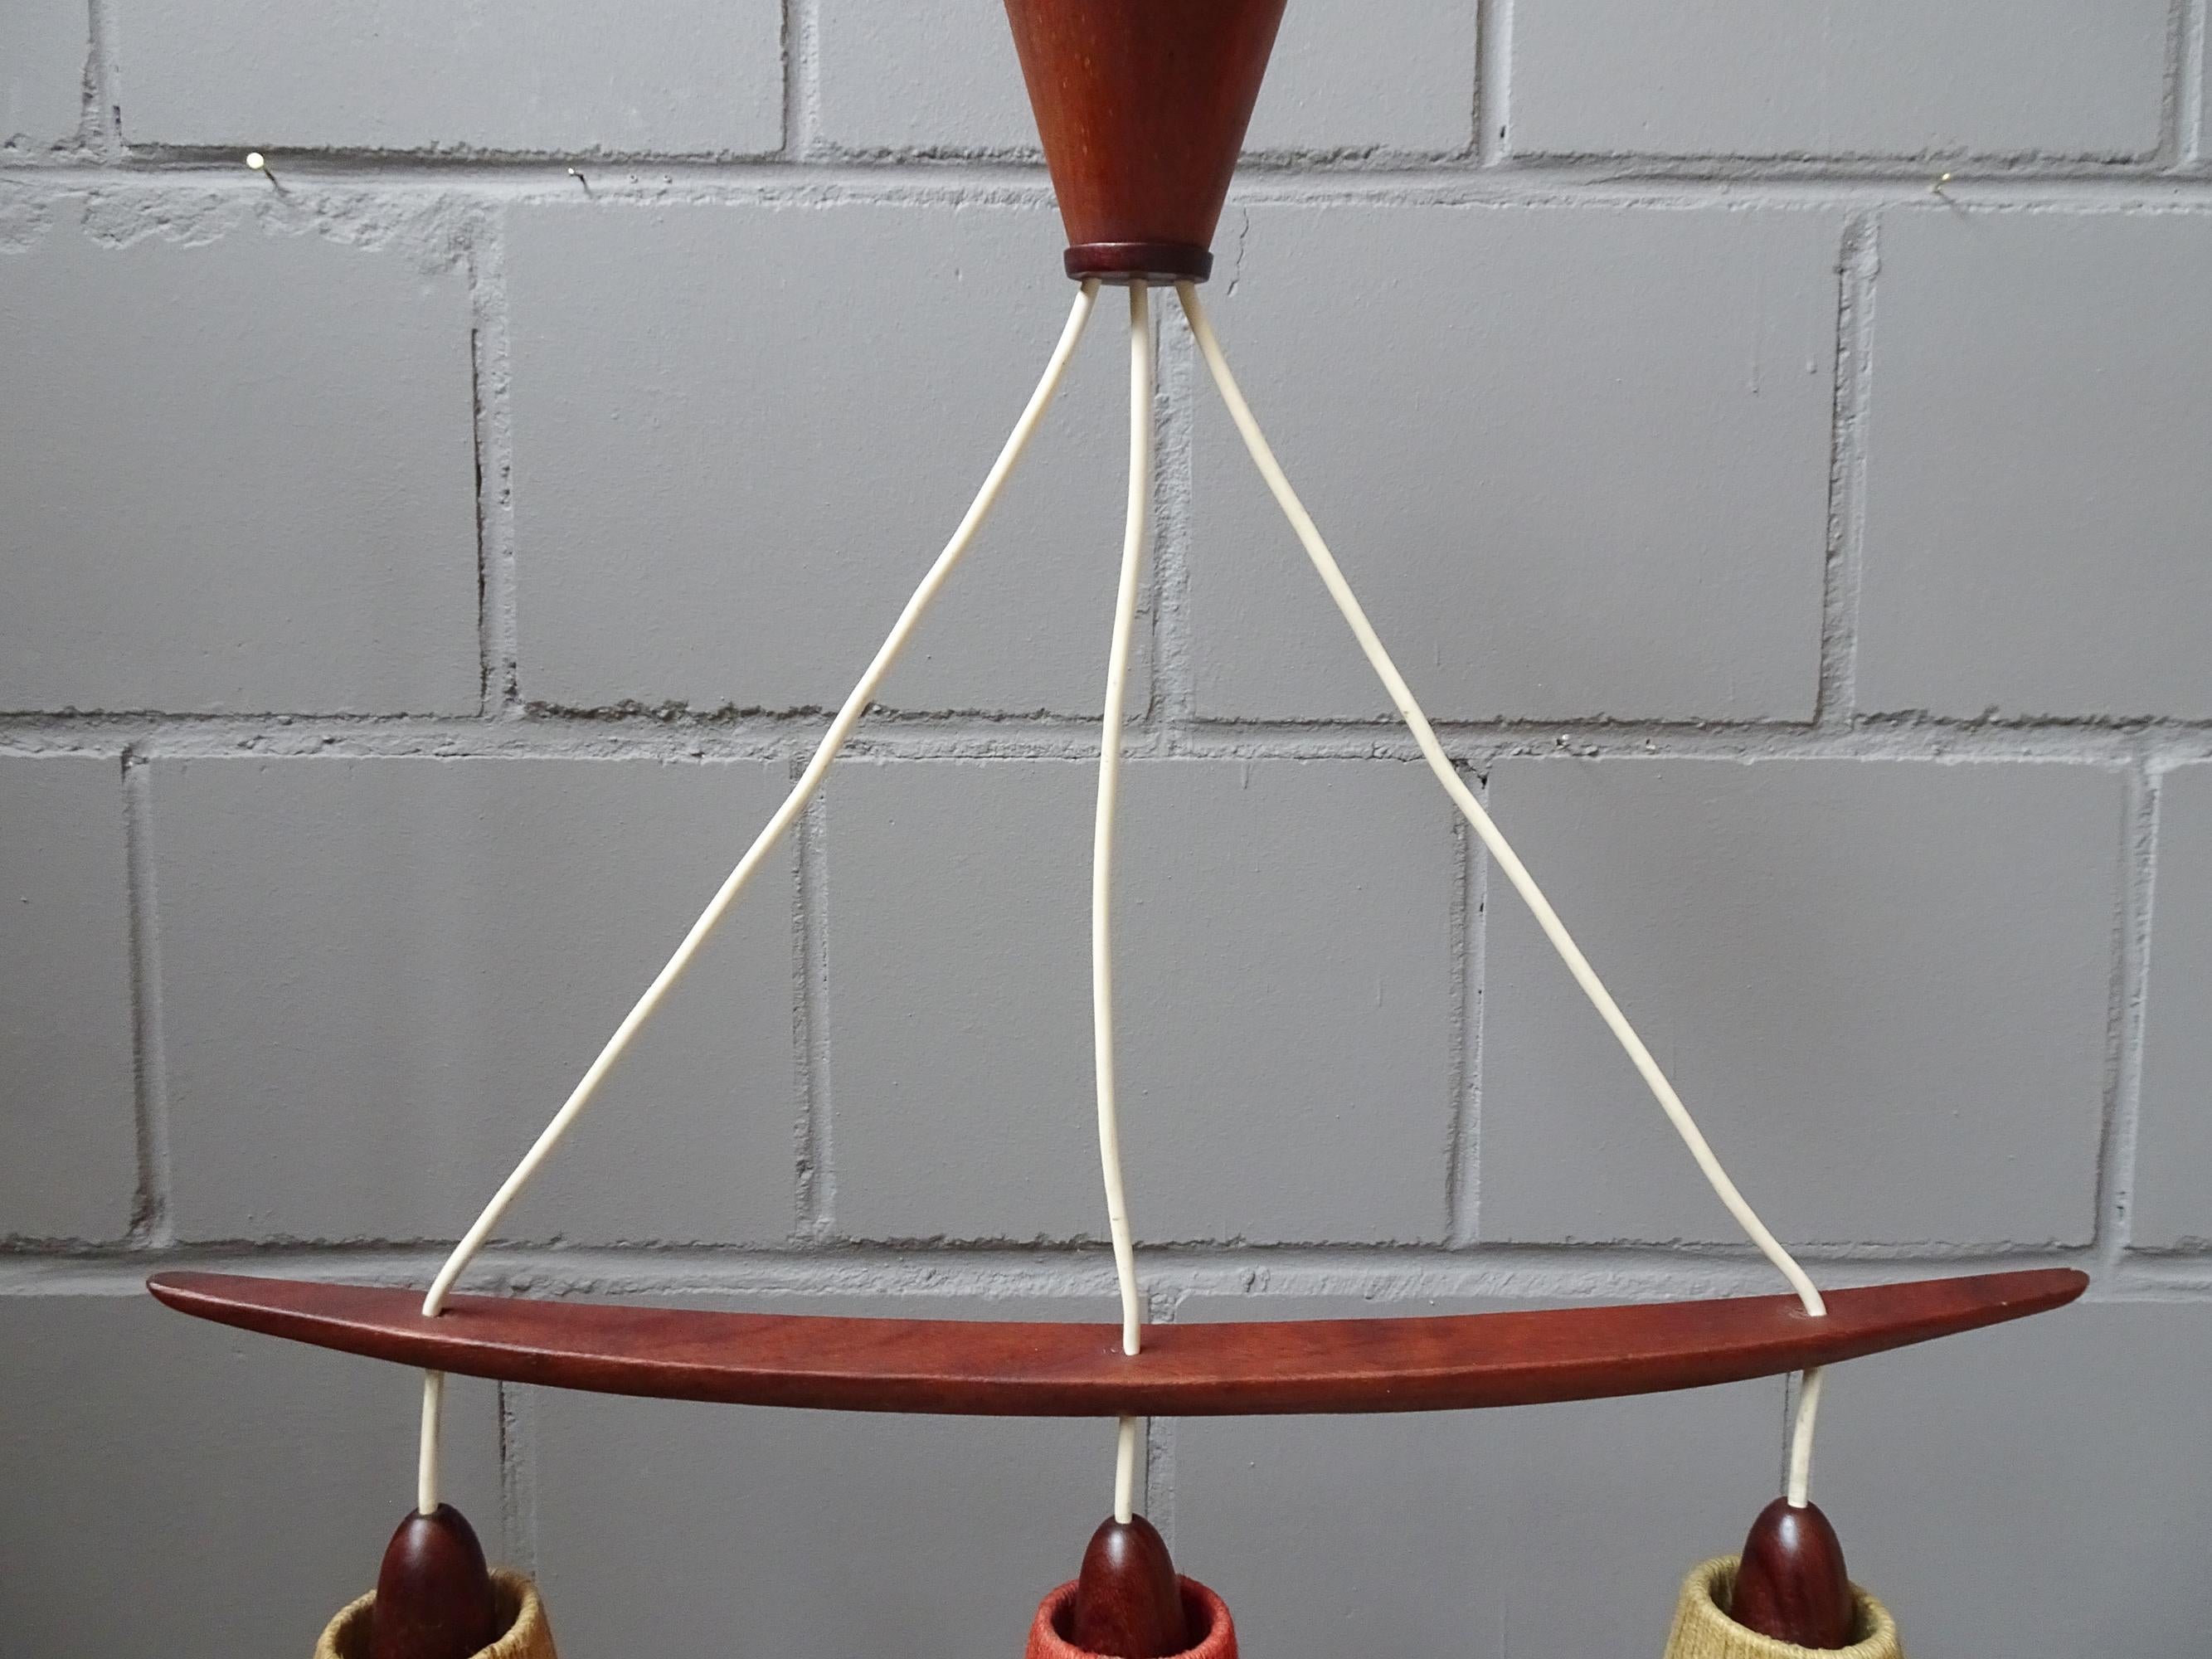 Plated Midcentury Teak and Cord Shade Chandelier by Temde, Germany, 1960 For Sale